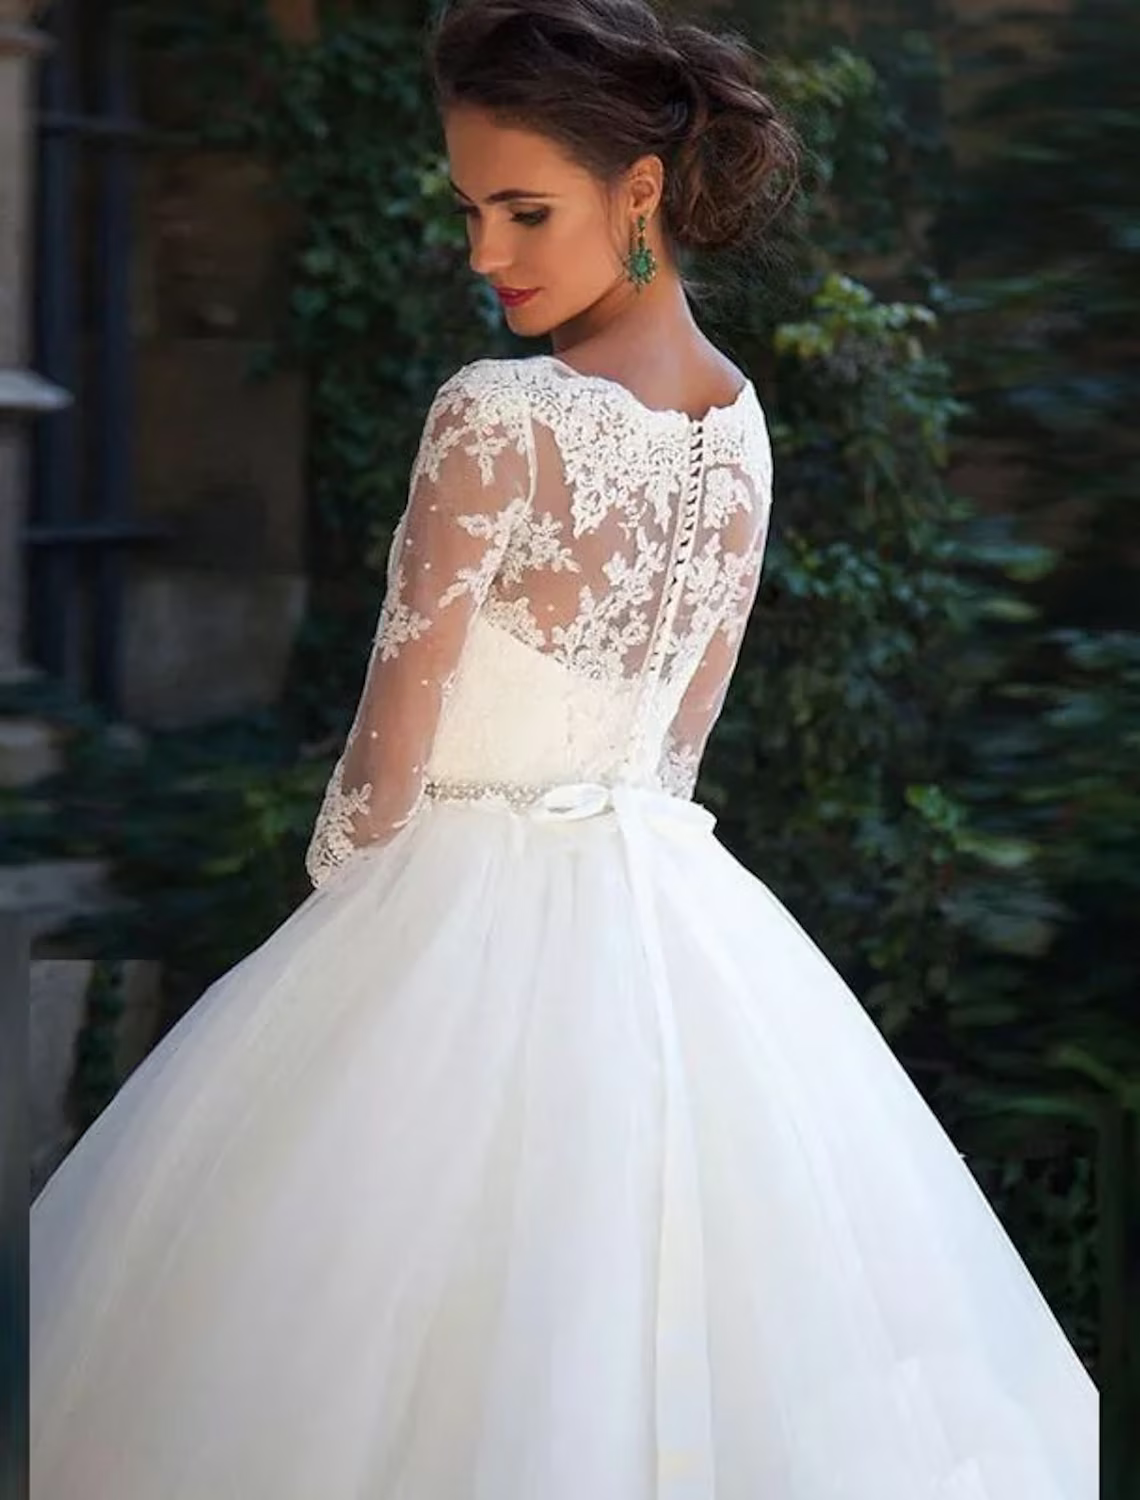 Engagement Formal Wedding Dresses Ball Gown Half Sleeve Lace With Appliques